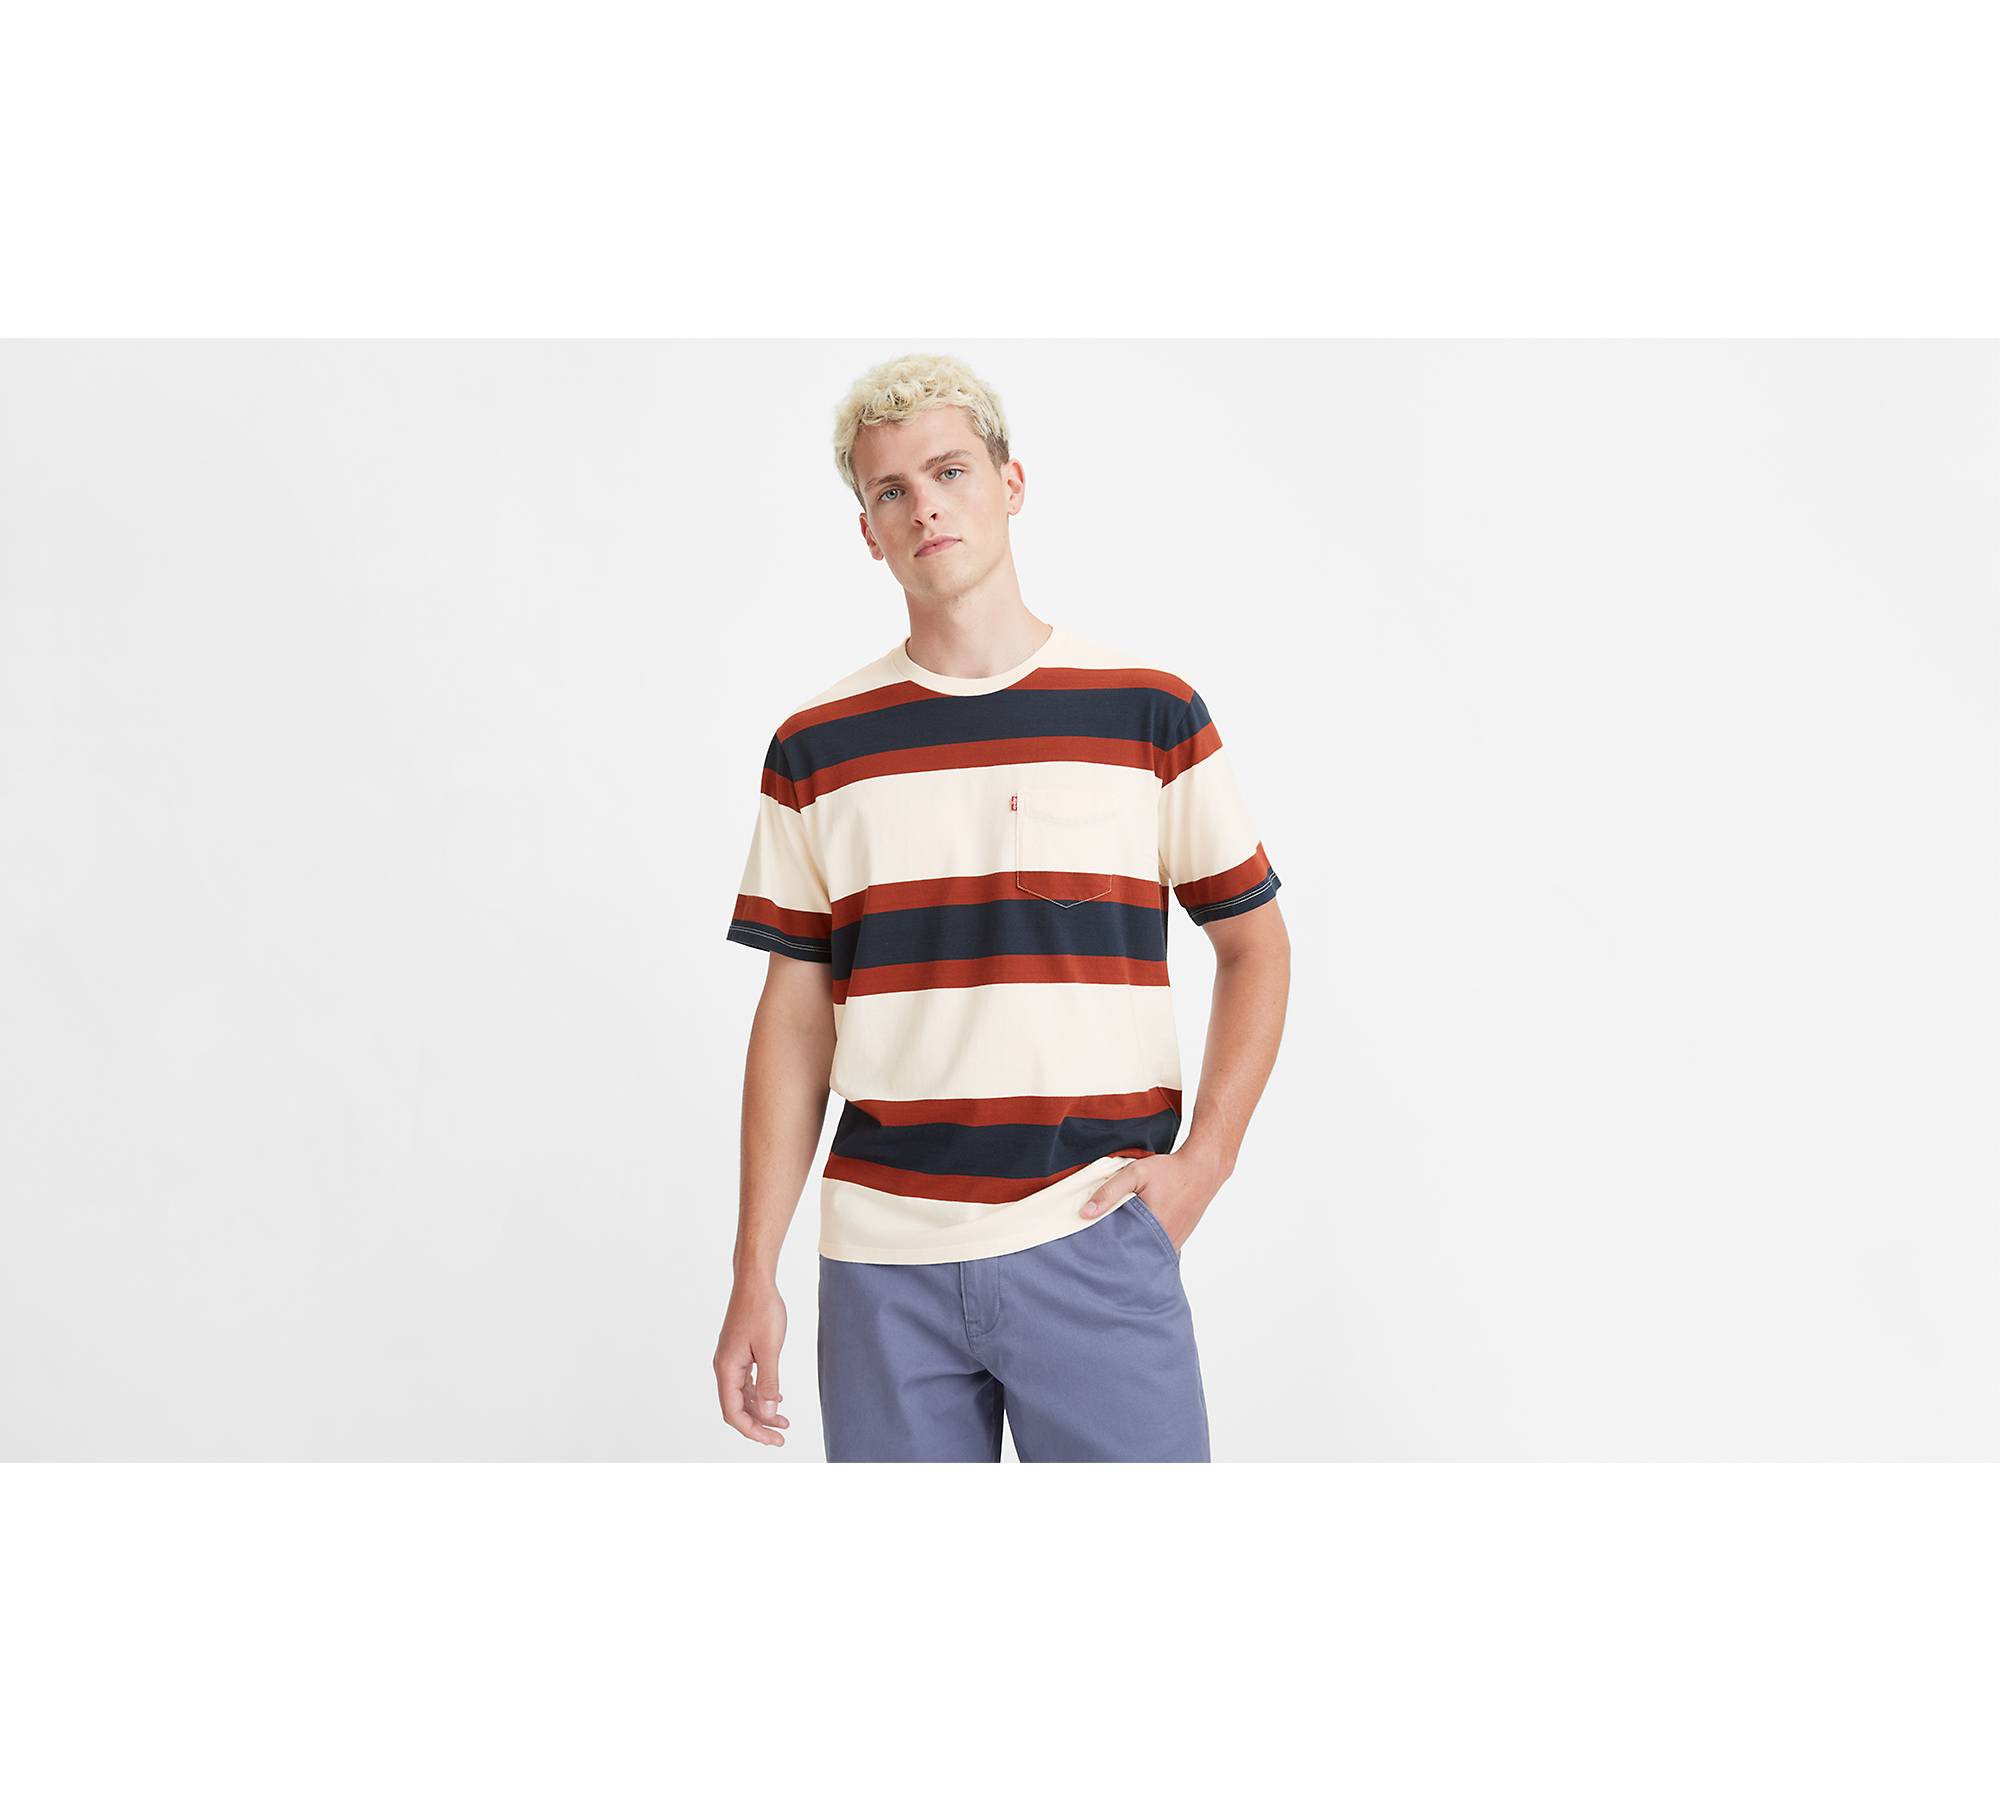 Relaxed Pocket Tee - Multi-color | Levi's® US